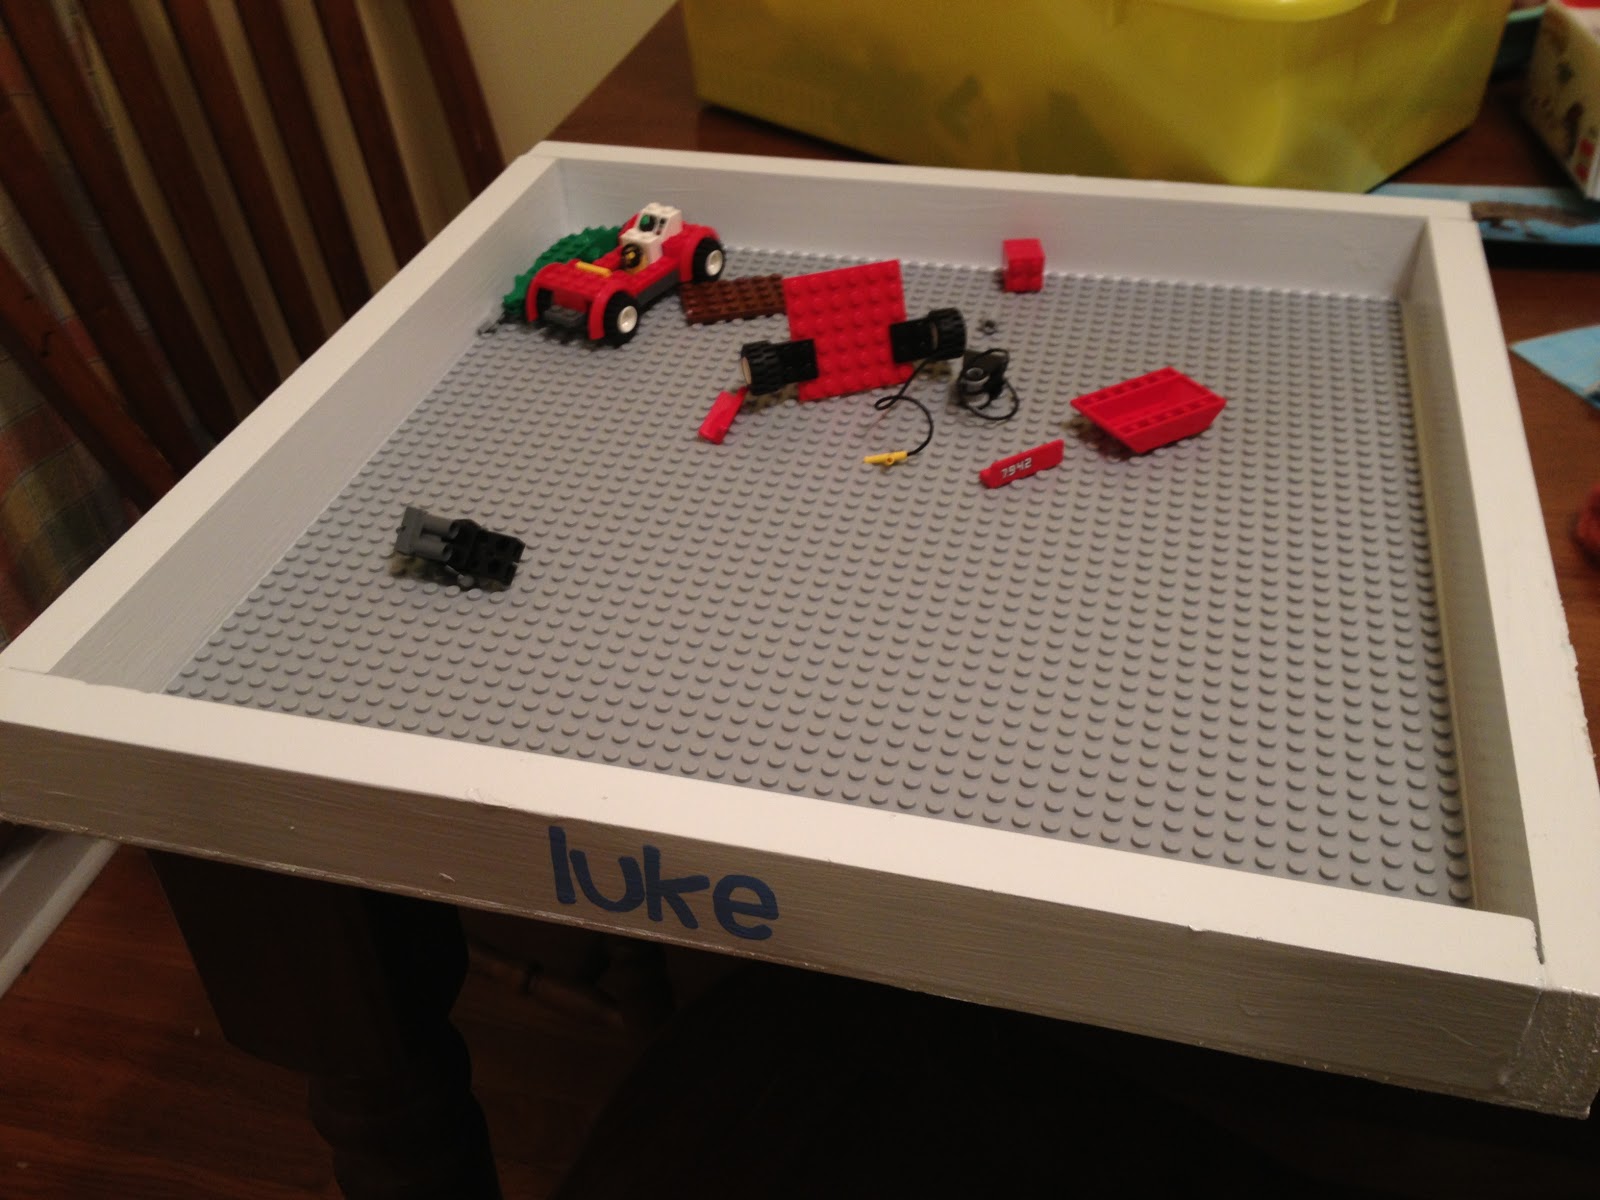 From The Hive: lego trays